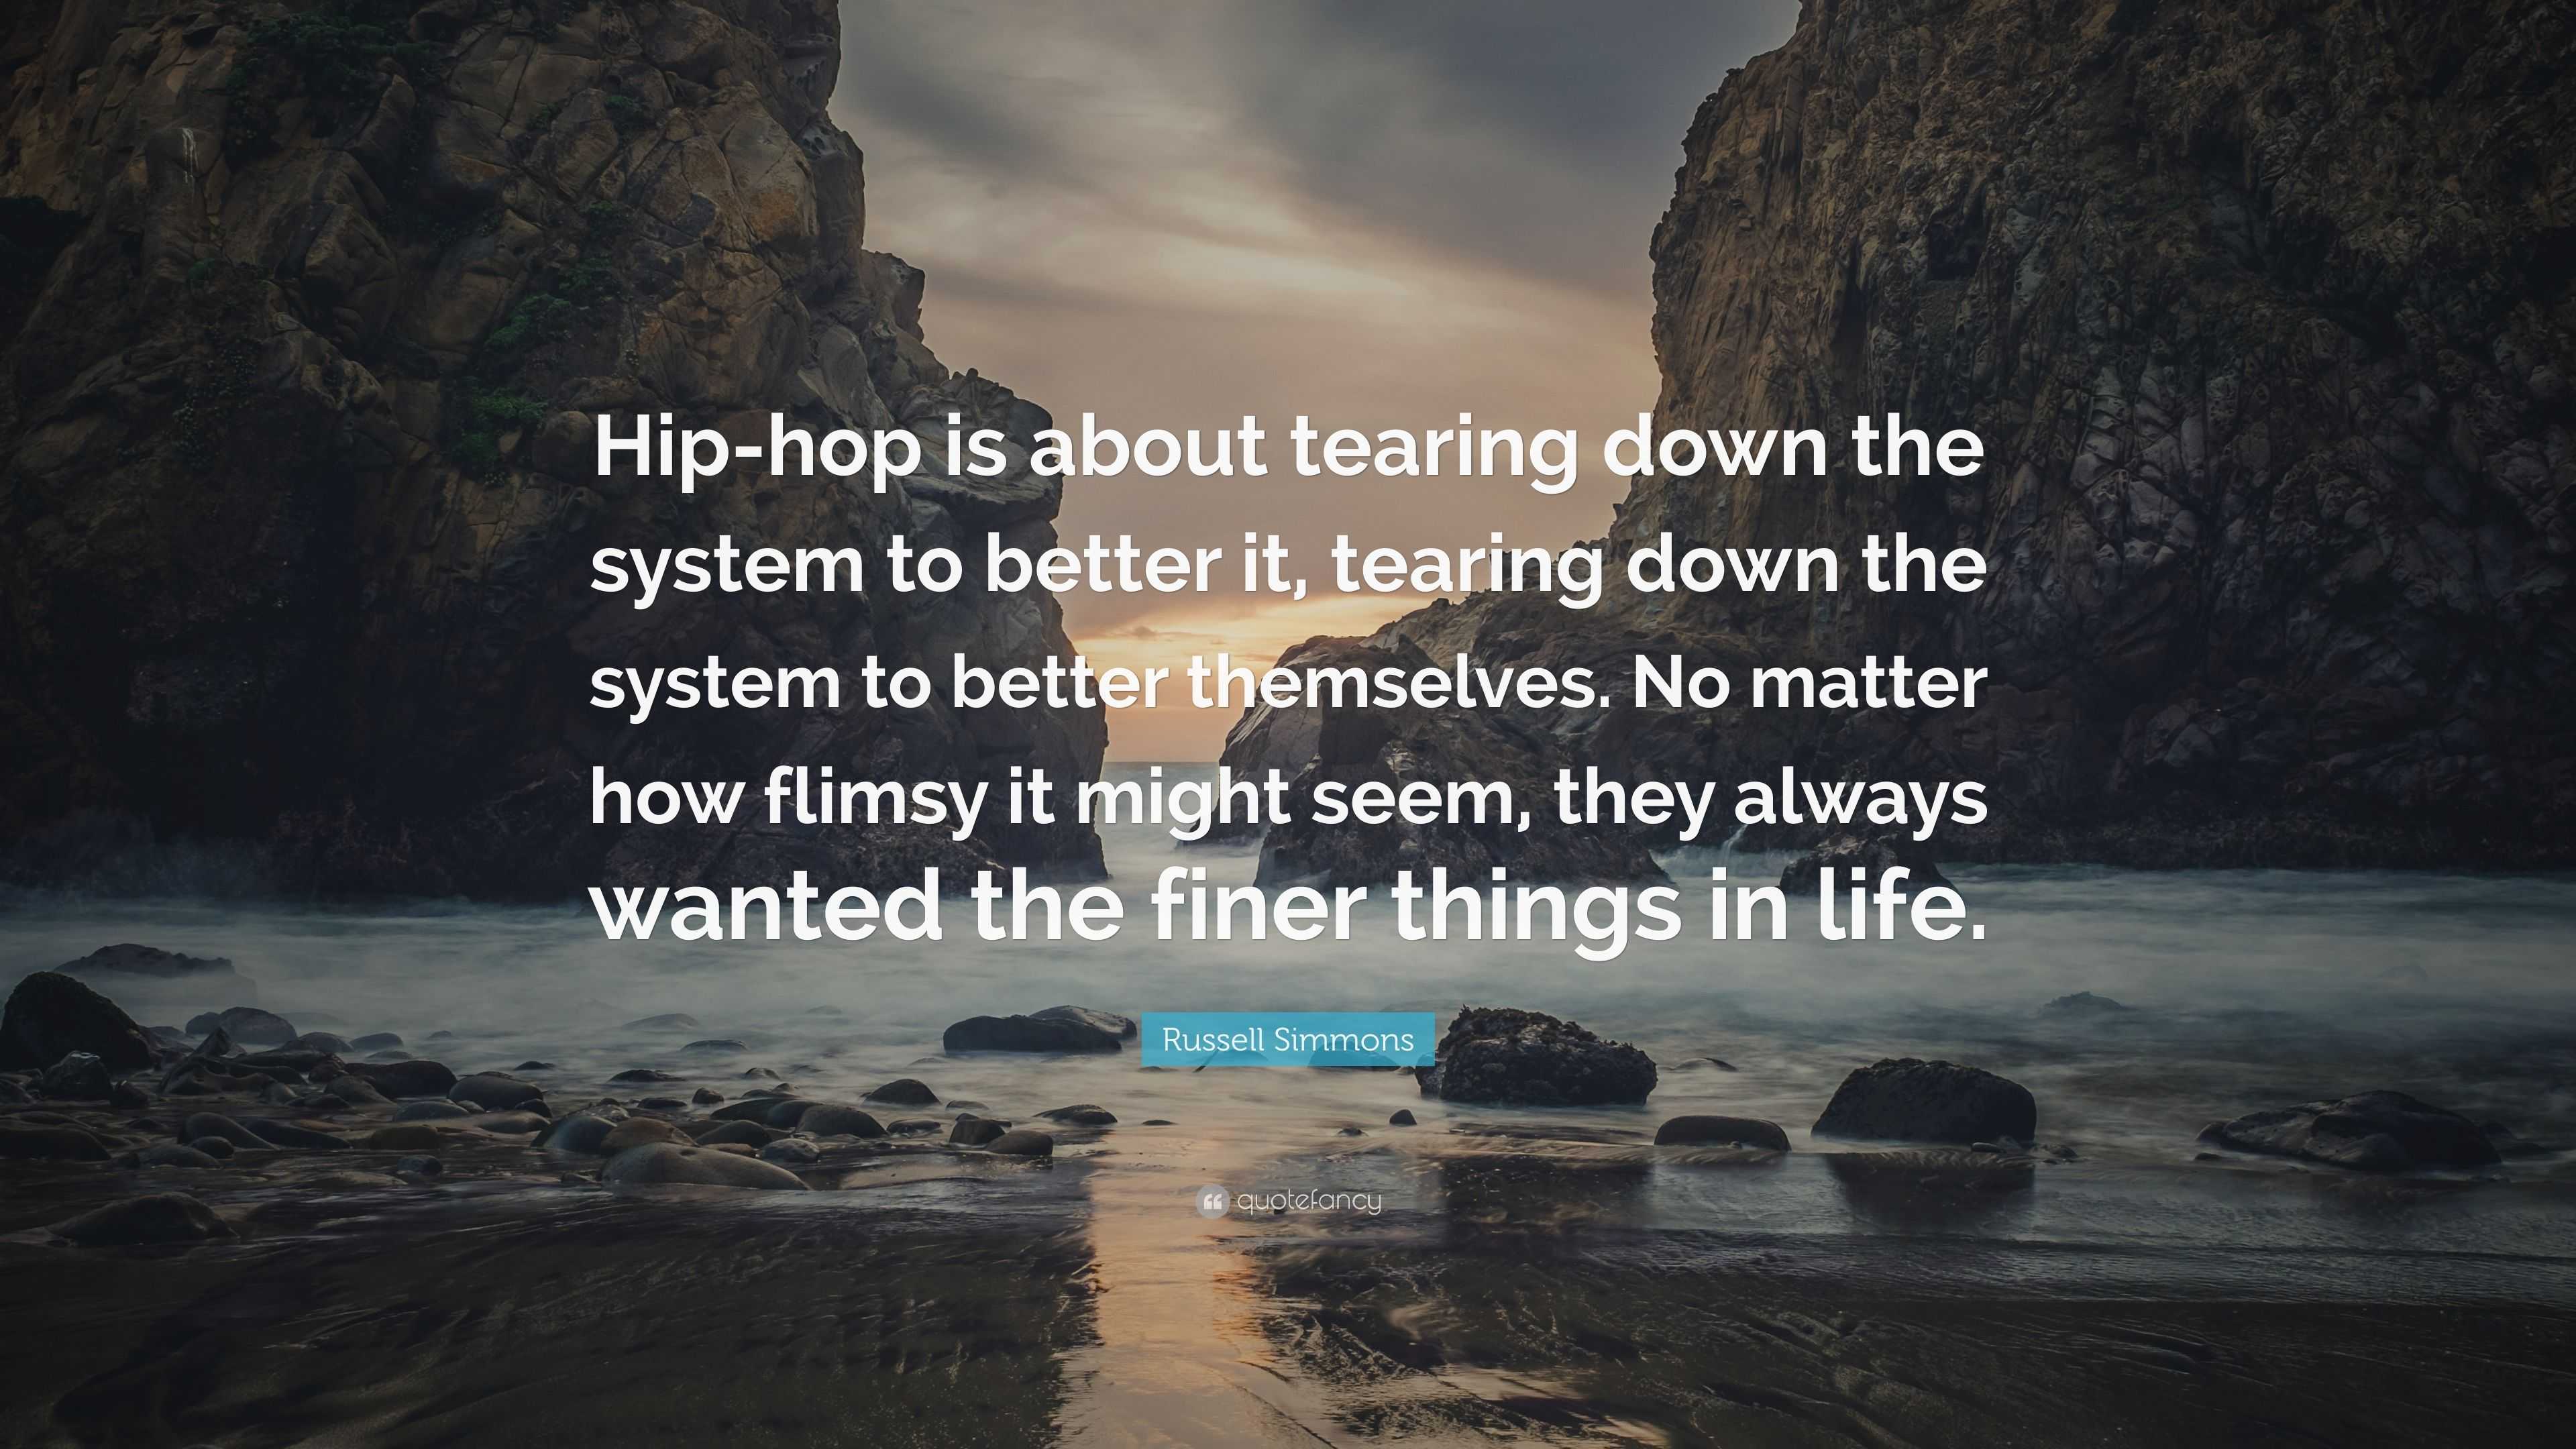 Russell Simmons Quote “Hip hop is about tearing down the system to better